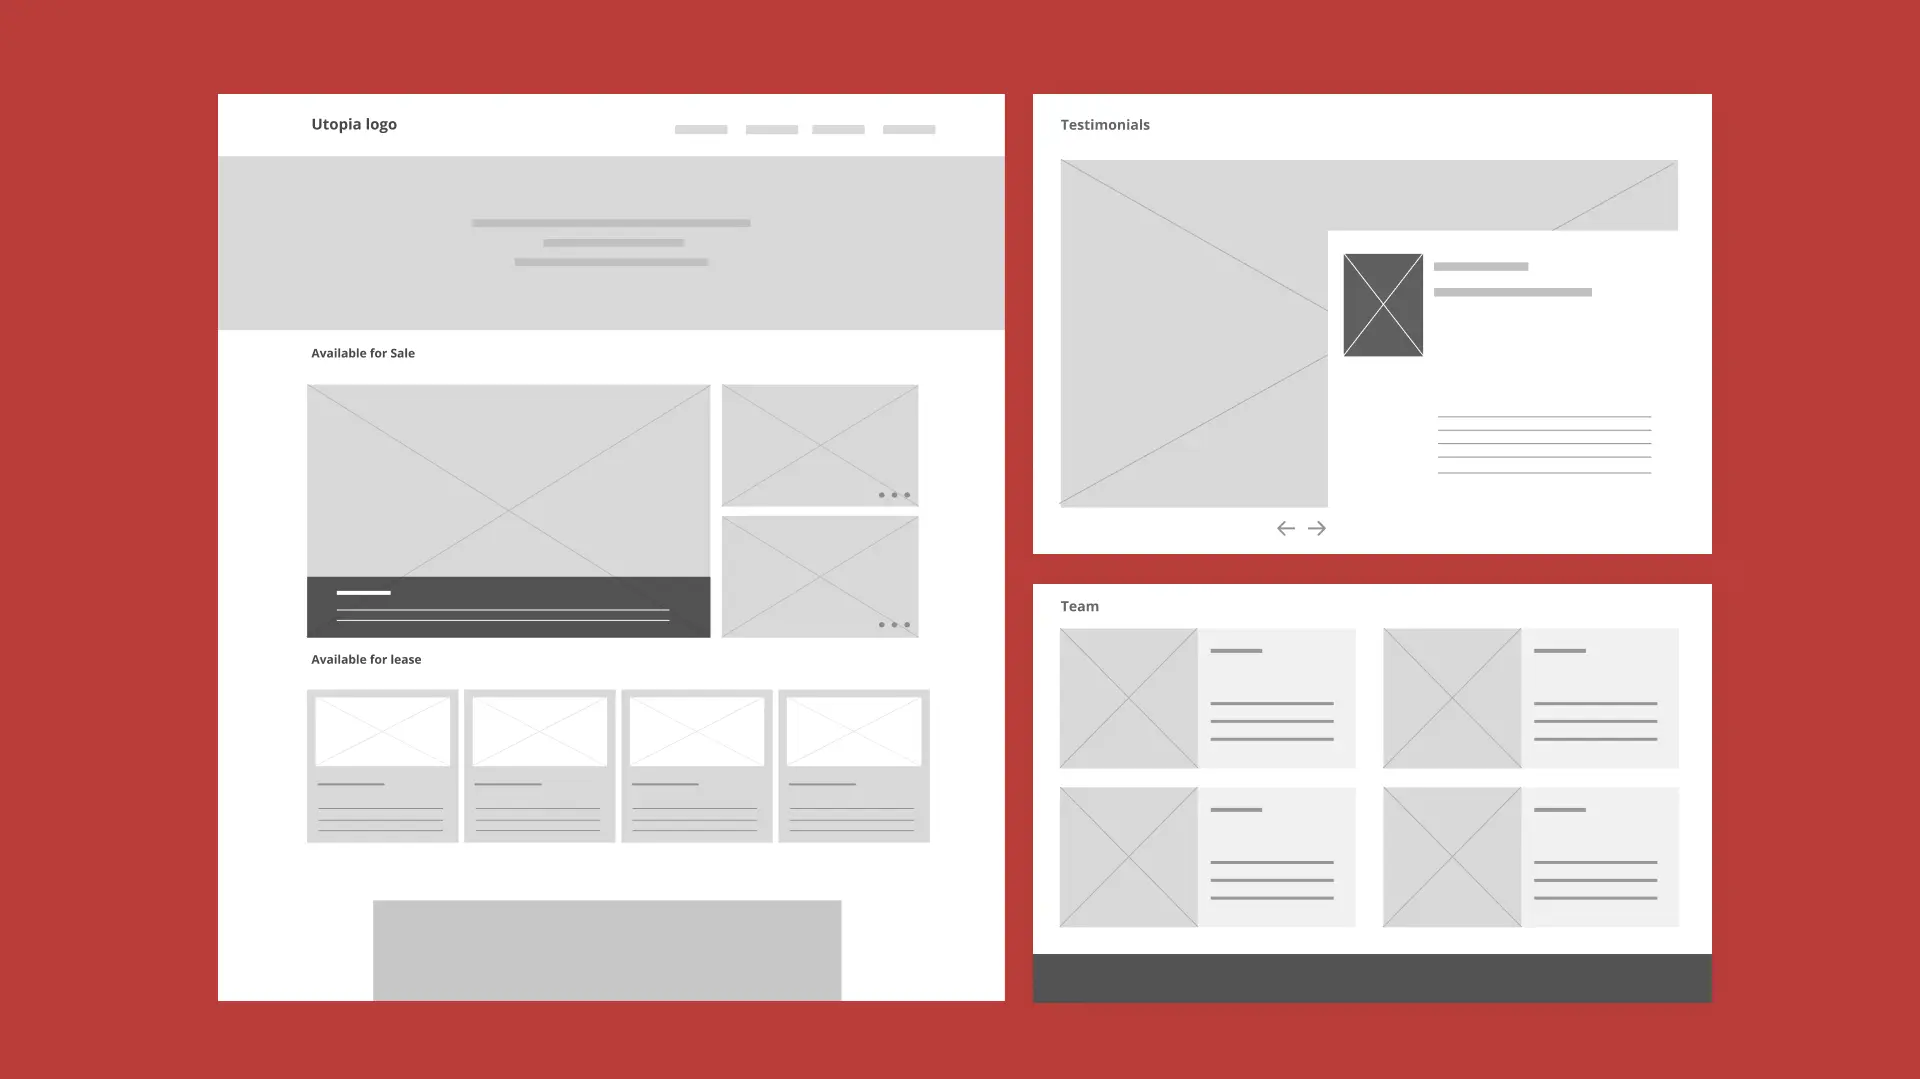 Prototyping Rough sketch of page layout, arrangements of content placeholders